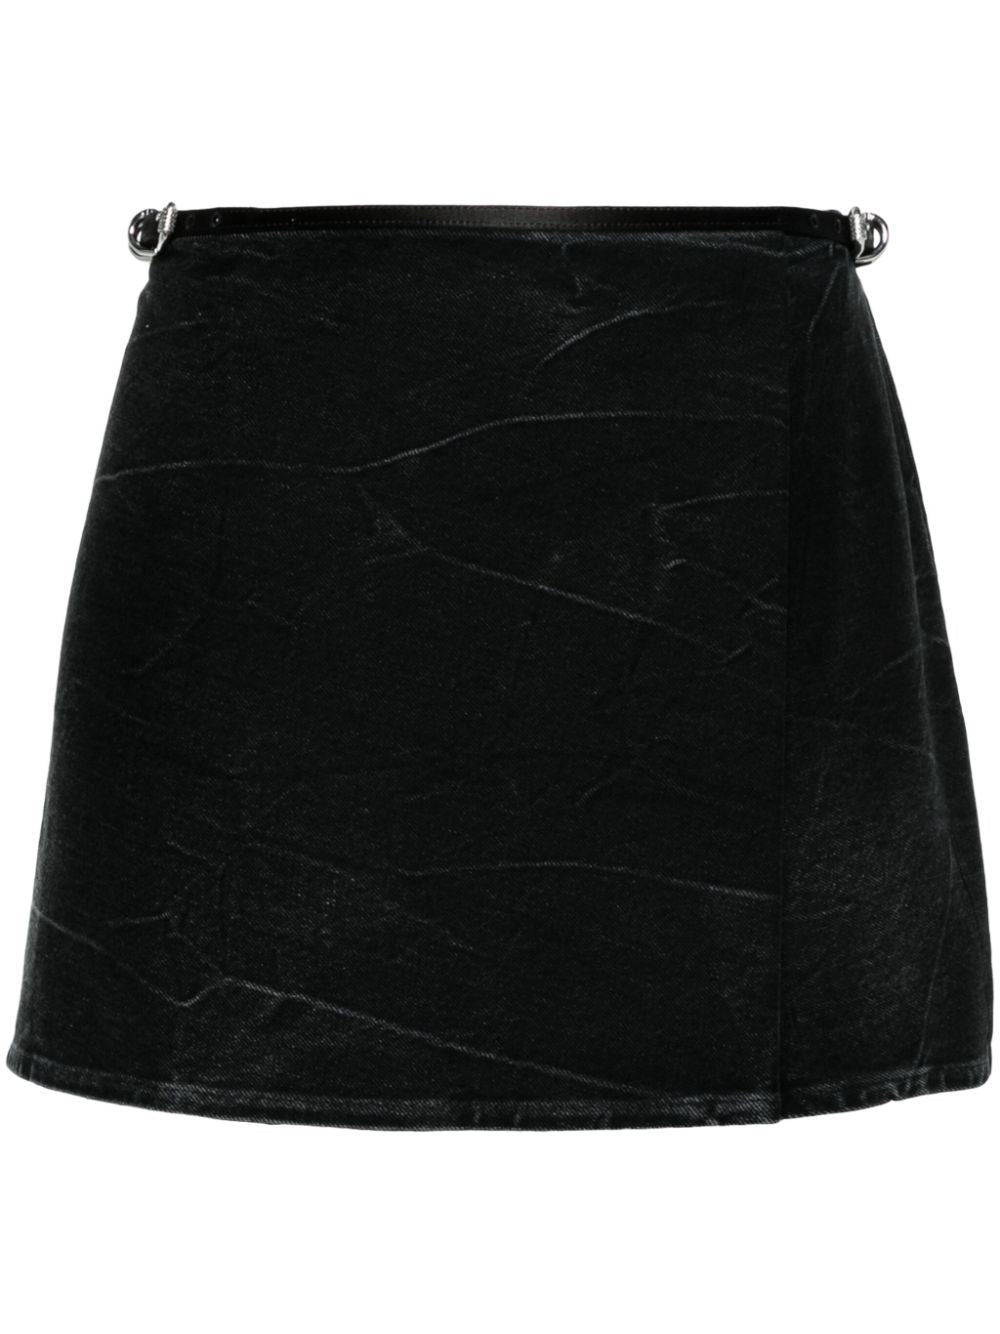 Givenchy Black Denim Wrap Mini Skirt With Belted Waist And Crinkled Finish